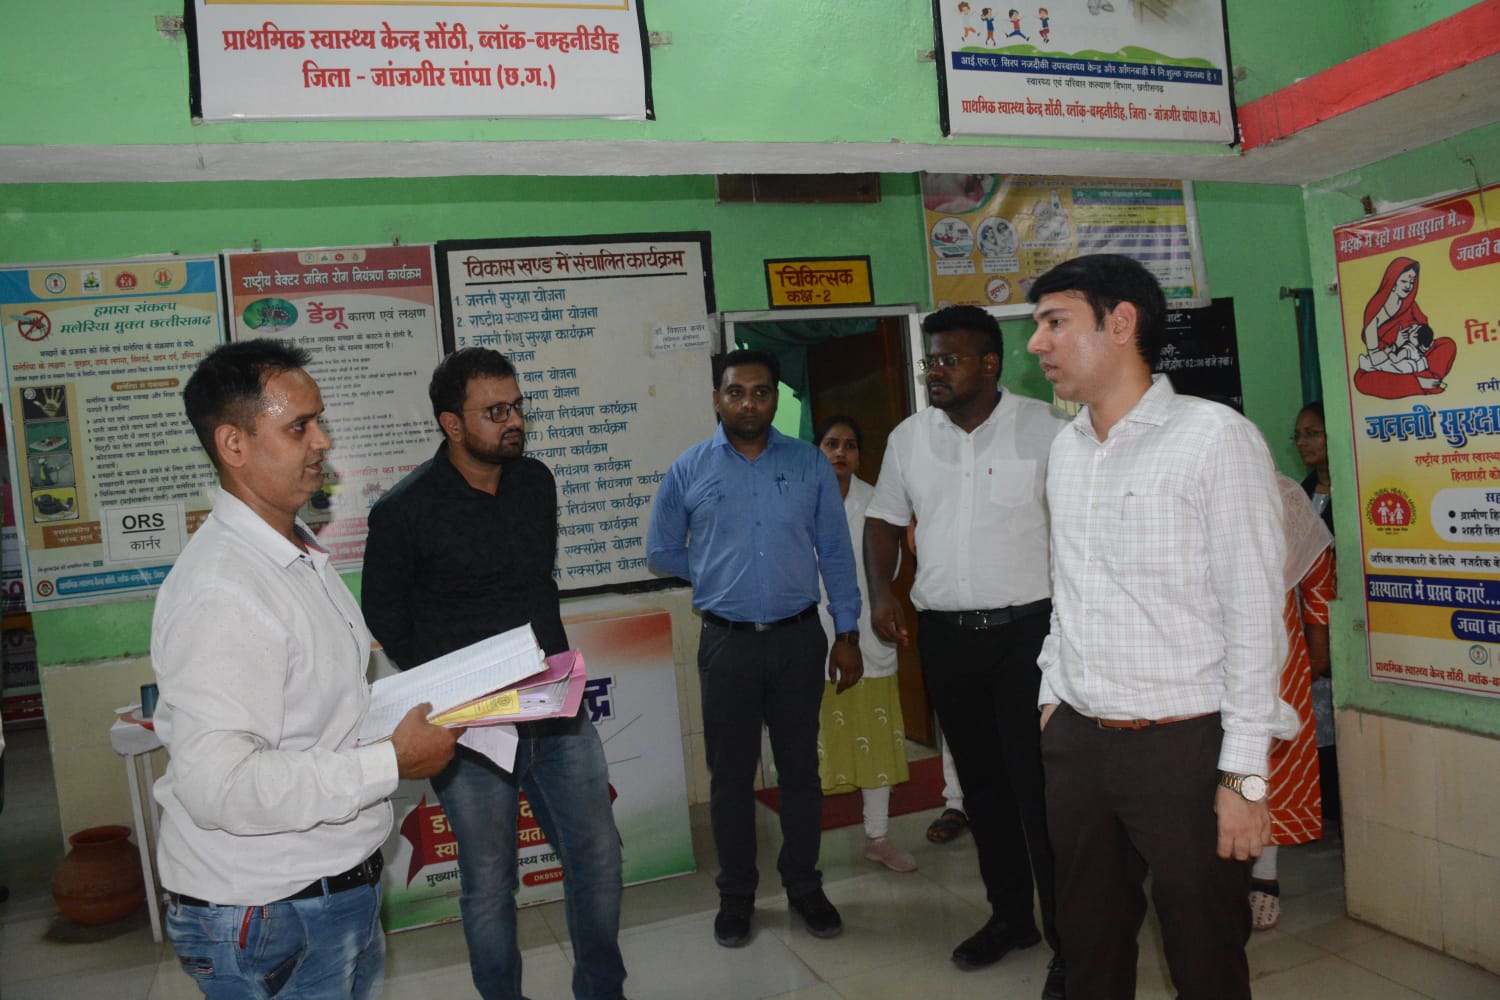 Collector Akash Chikara did a surprise inspection of buffaloes of Primary Health Center